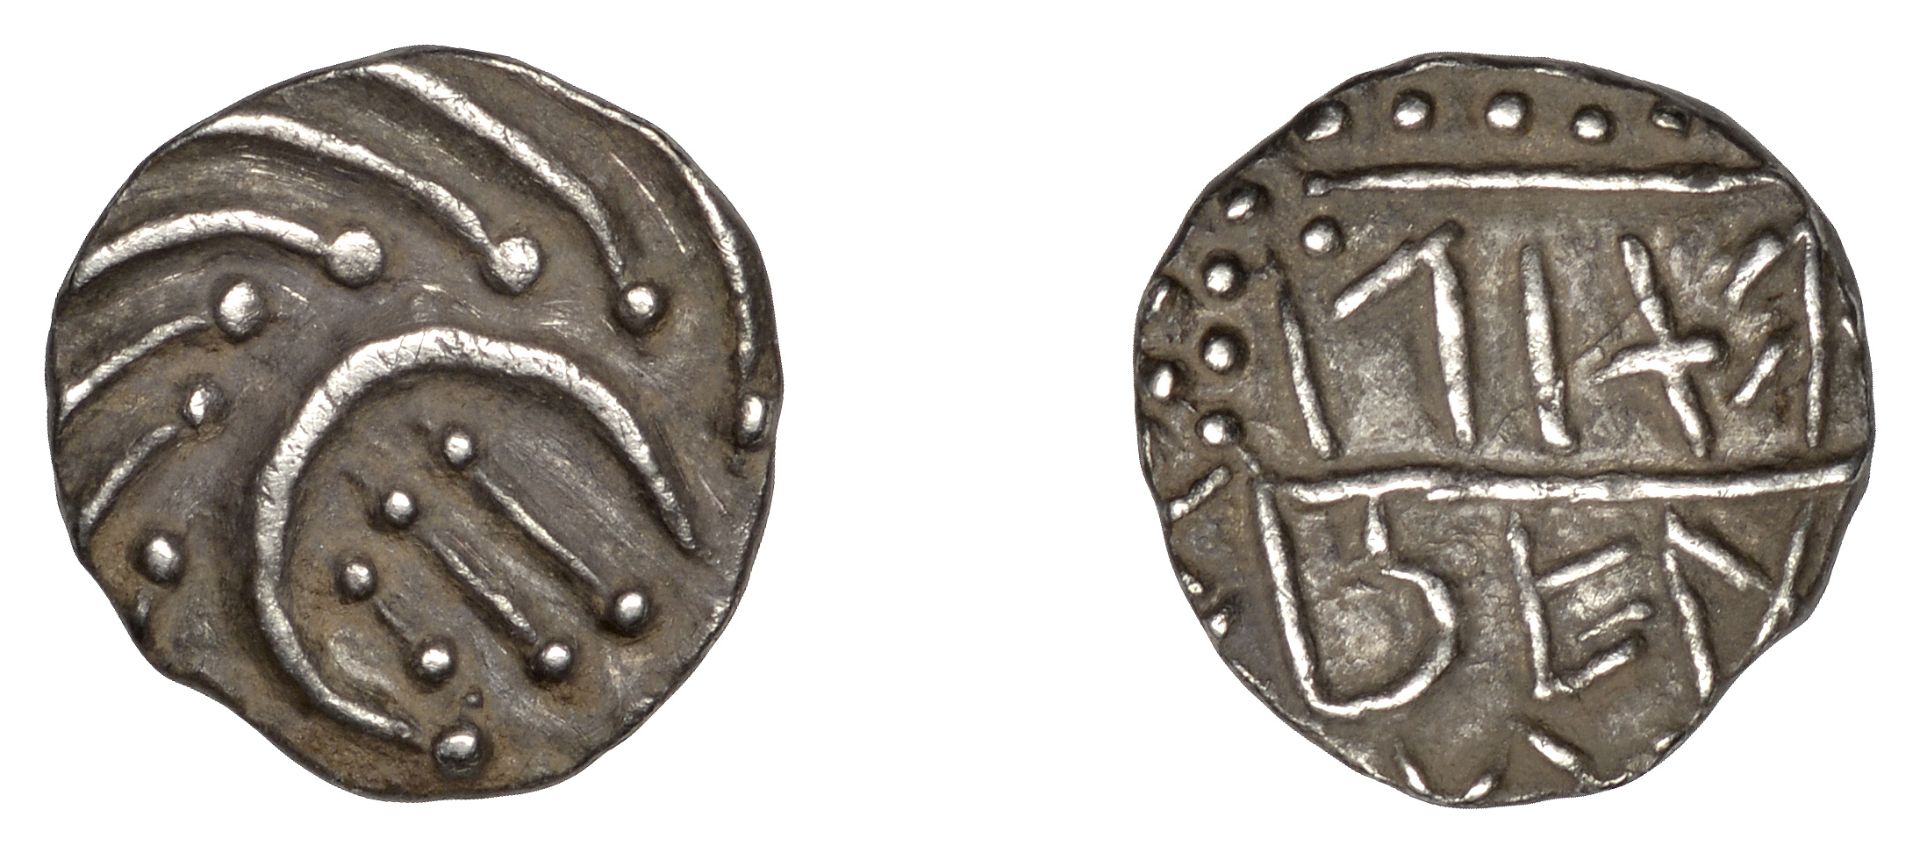 Early Anglo-Saxon Period, KINGS OF MERCIA, Ã†thelred?, Sceatta, Primary series E, 'Ã†thilired'...